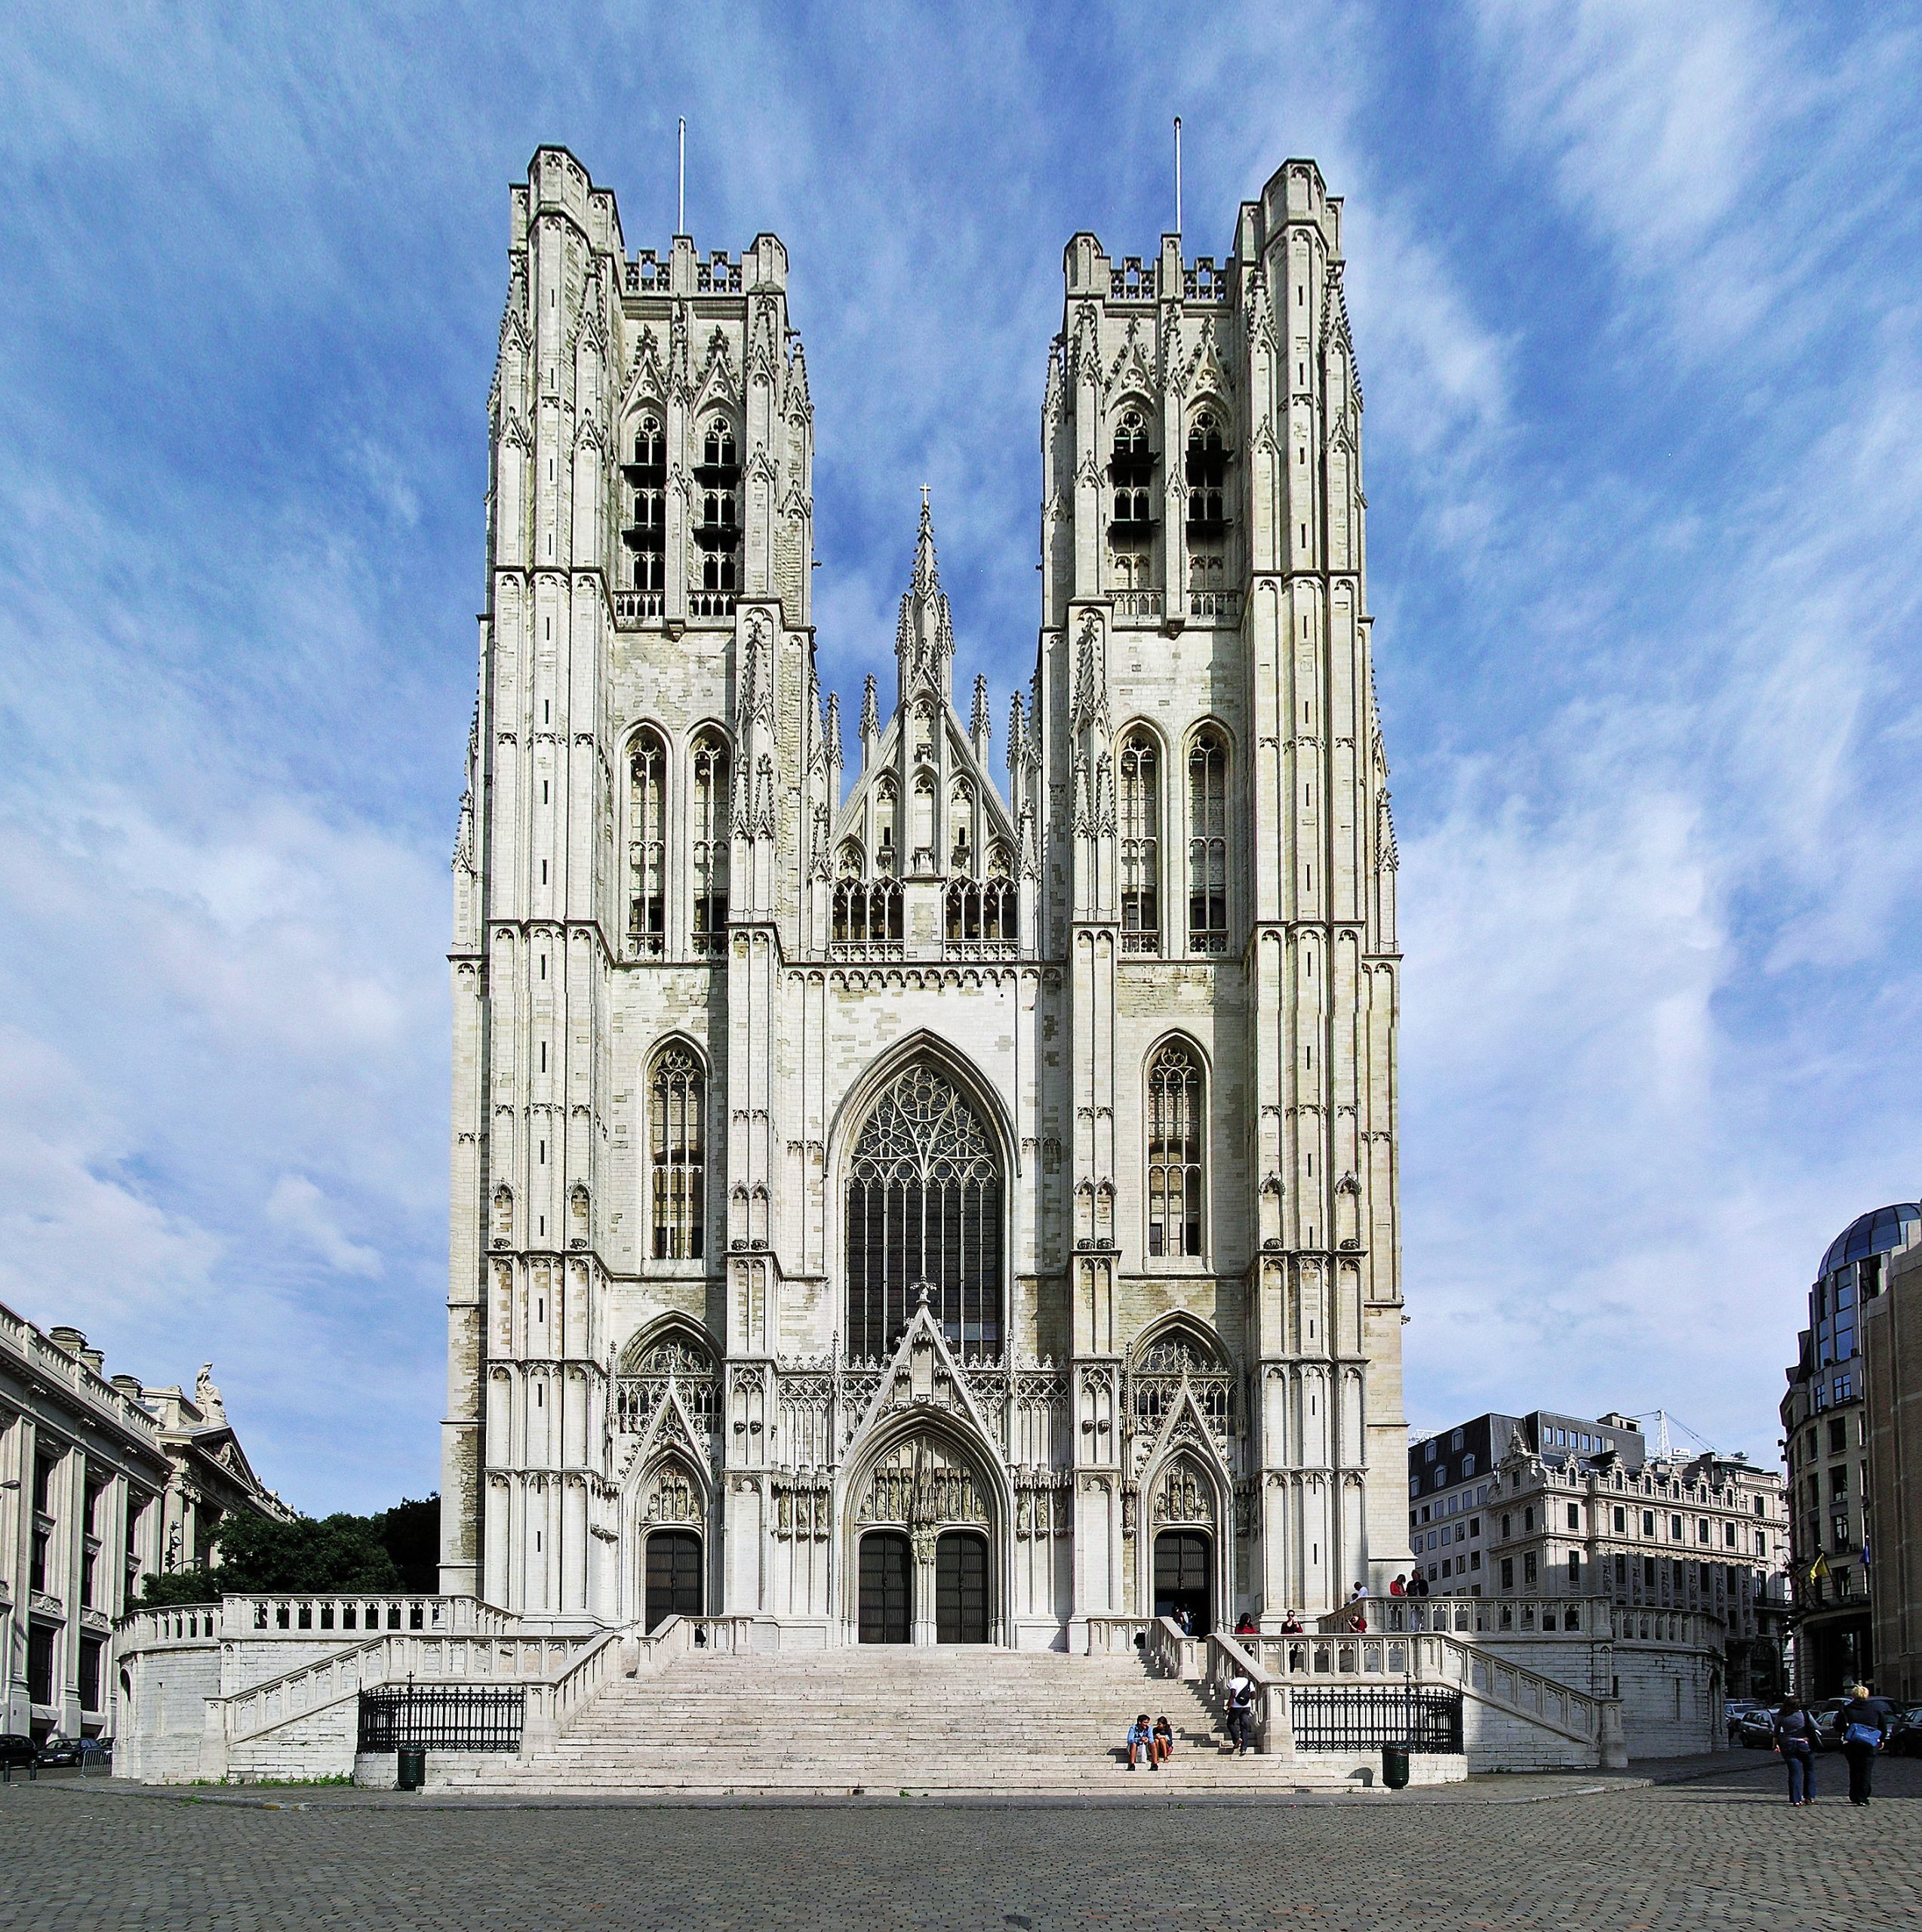 A medieval Roman Catholic cathedral in central Brussel